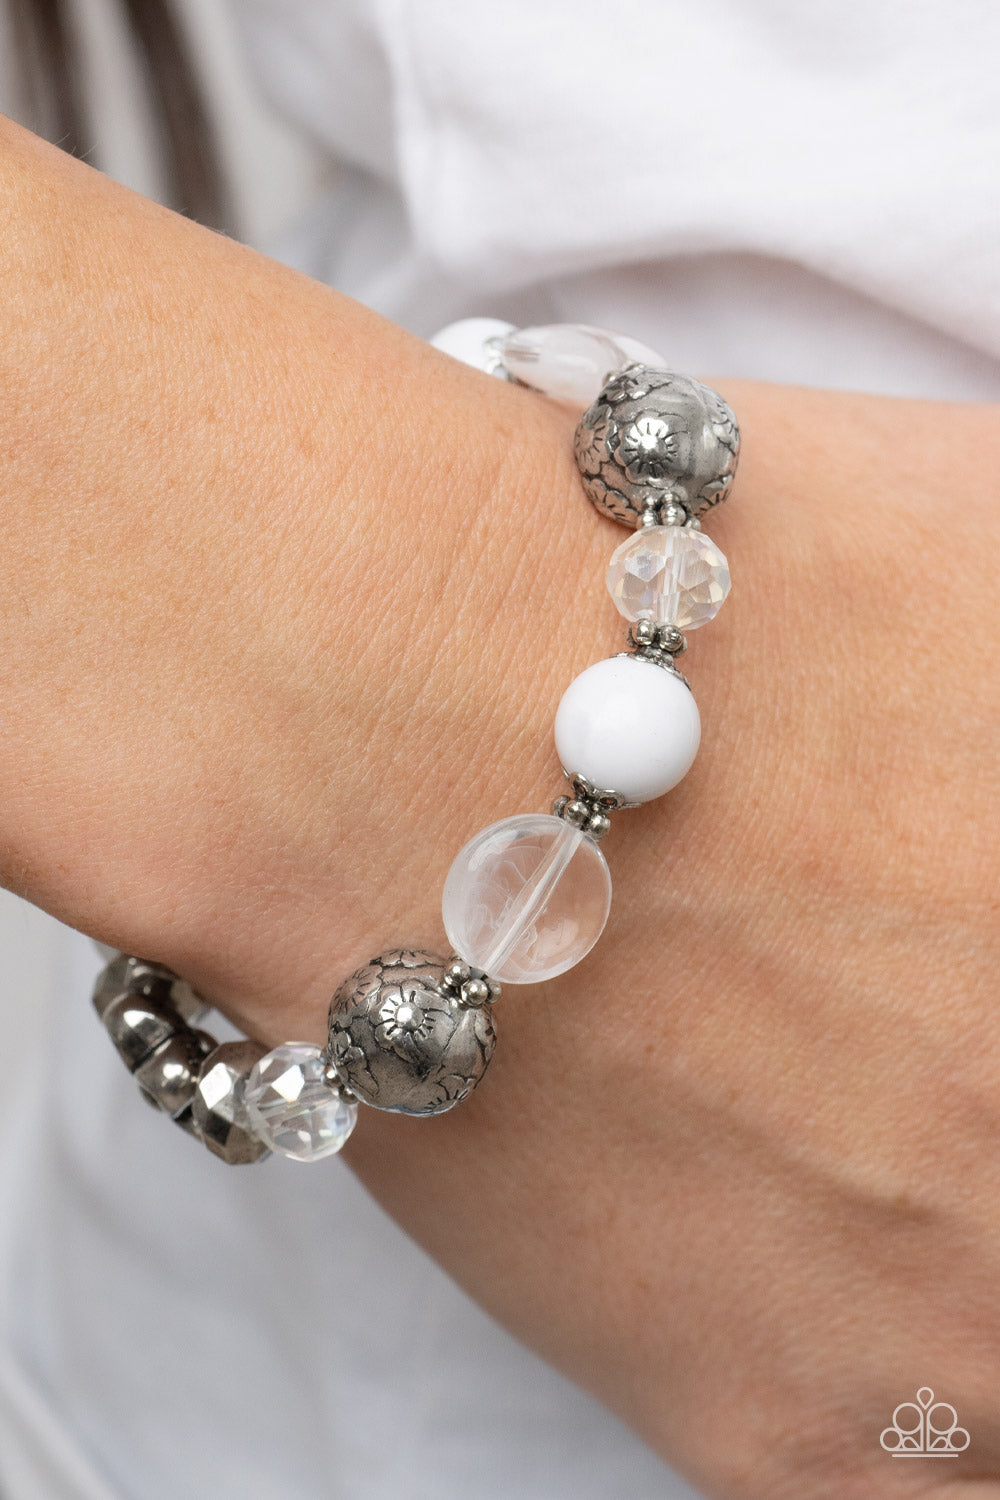 Pretty Persuasion - Iridescent White and Silver Bracelet - Paparazzi Accessories - Enchanting assortment of silver floral beads and studded silver rings join an opaque, glassy, and iridescent assortment of white beads along a stretchy band around the wrist.